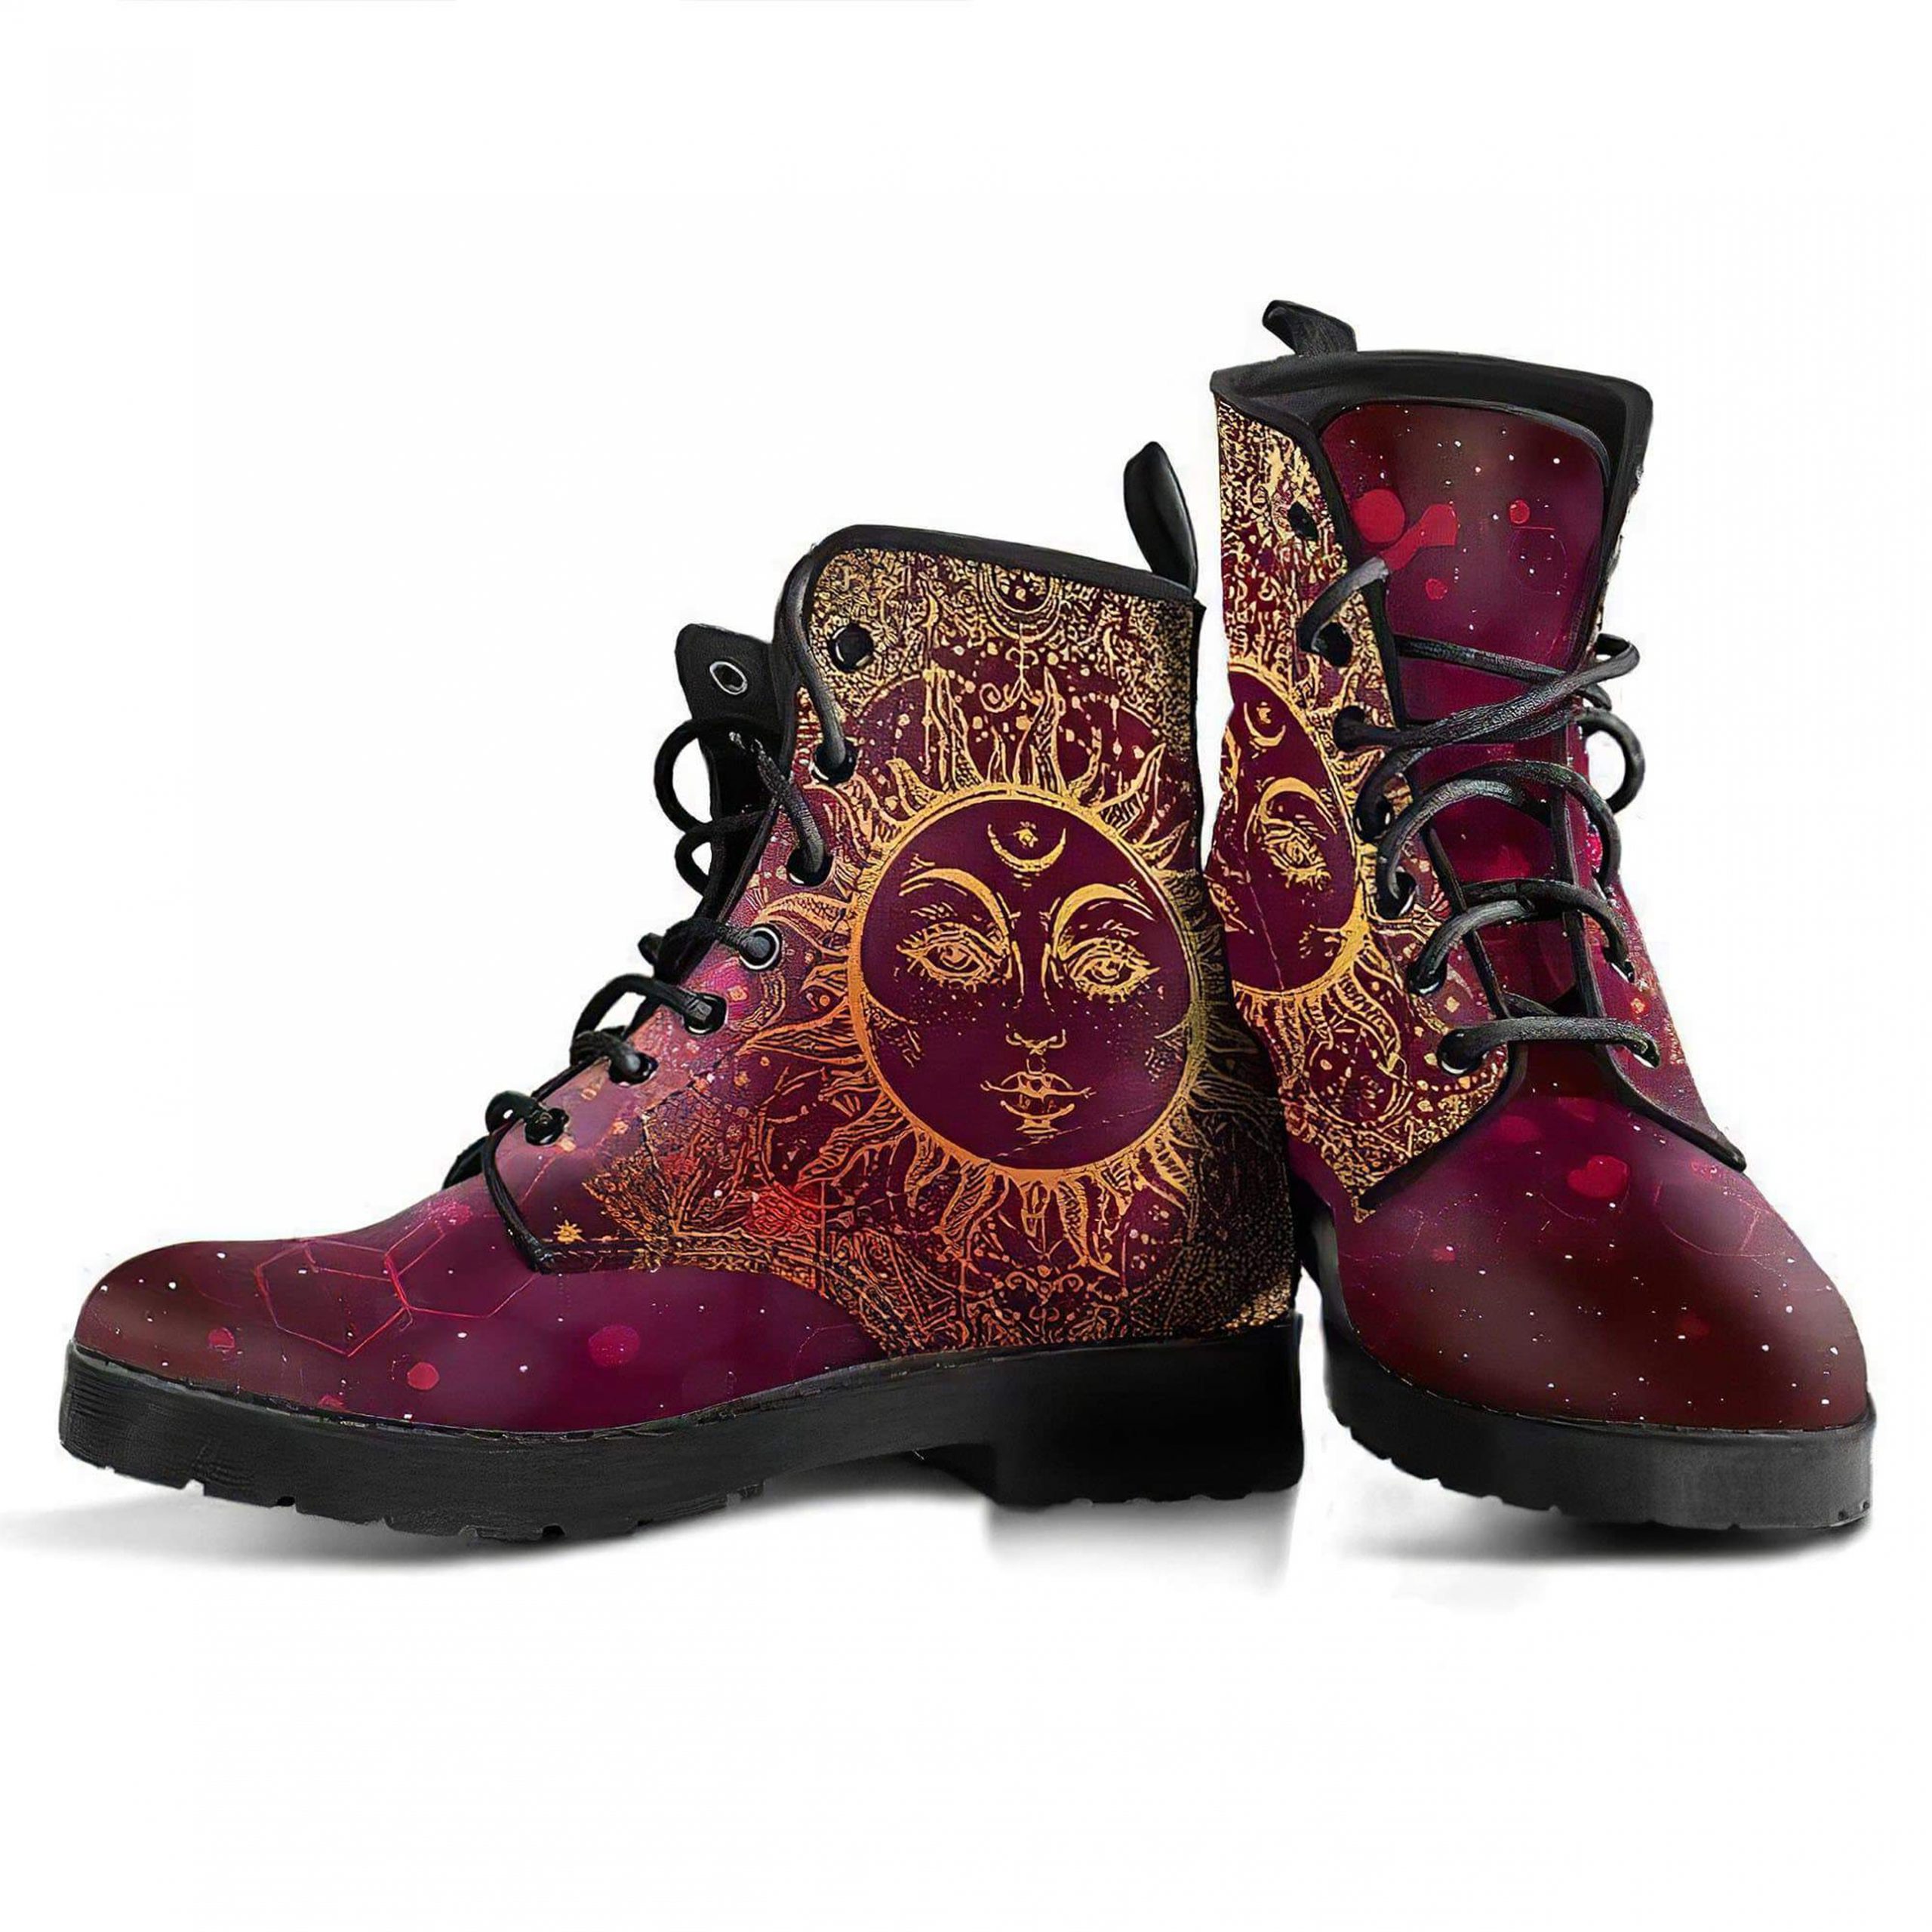 Maroon Sun Printed Boots | Vegan Leather Lace Up Printed Boots For Women